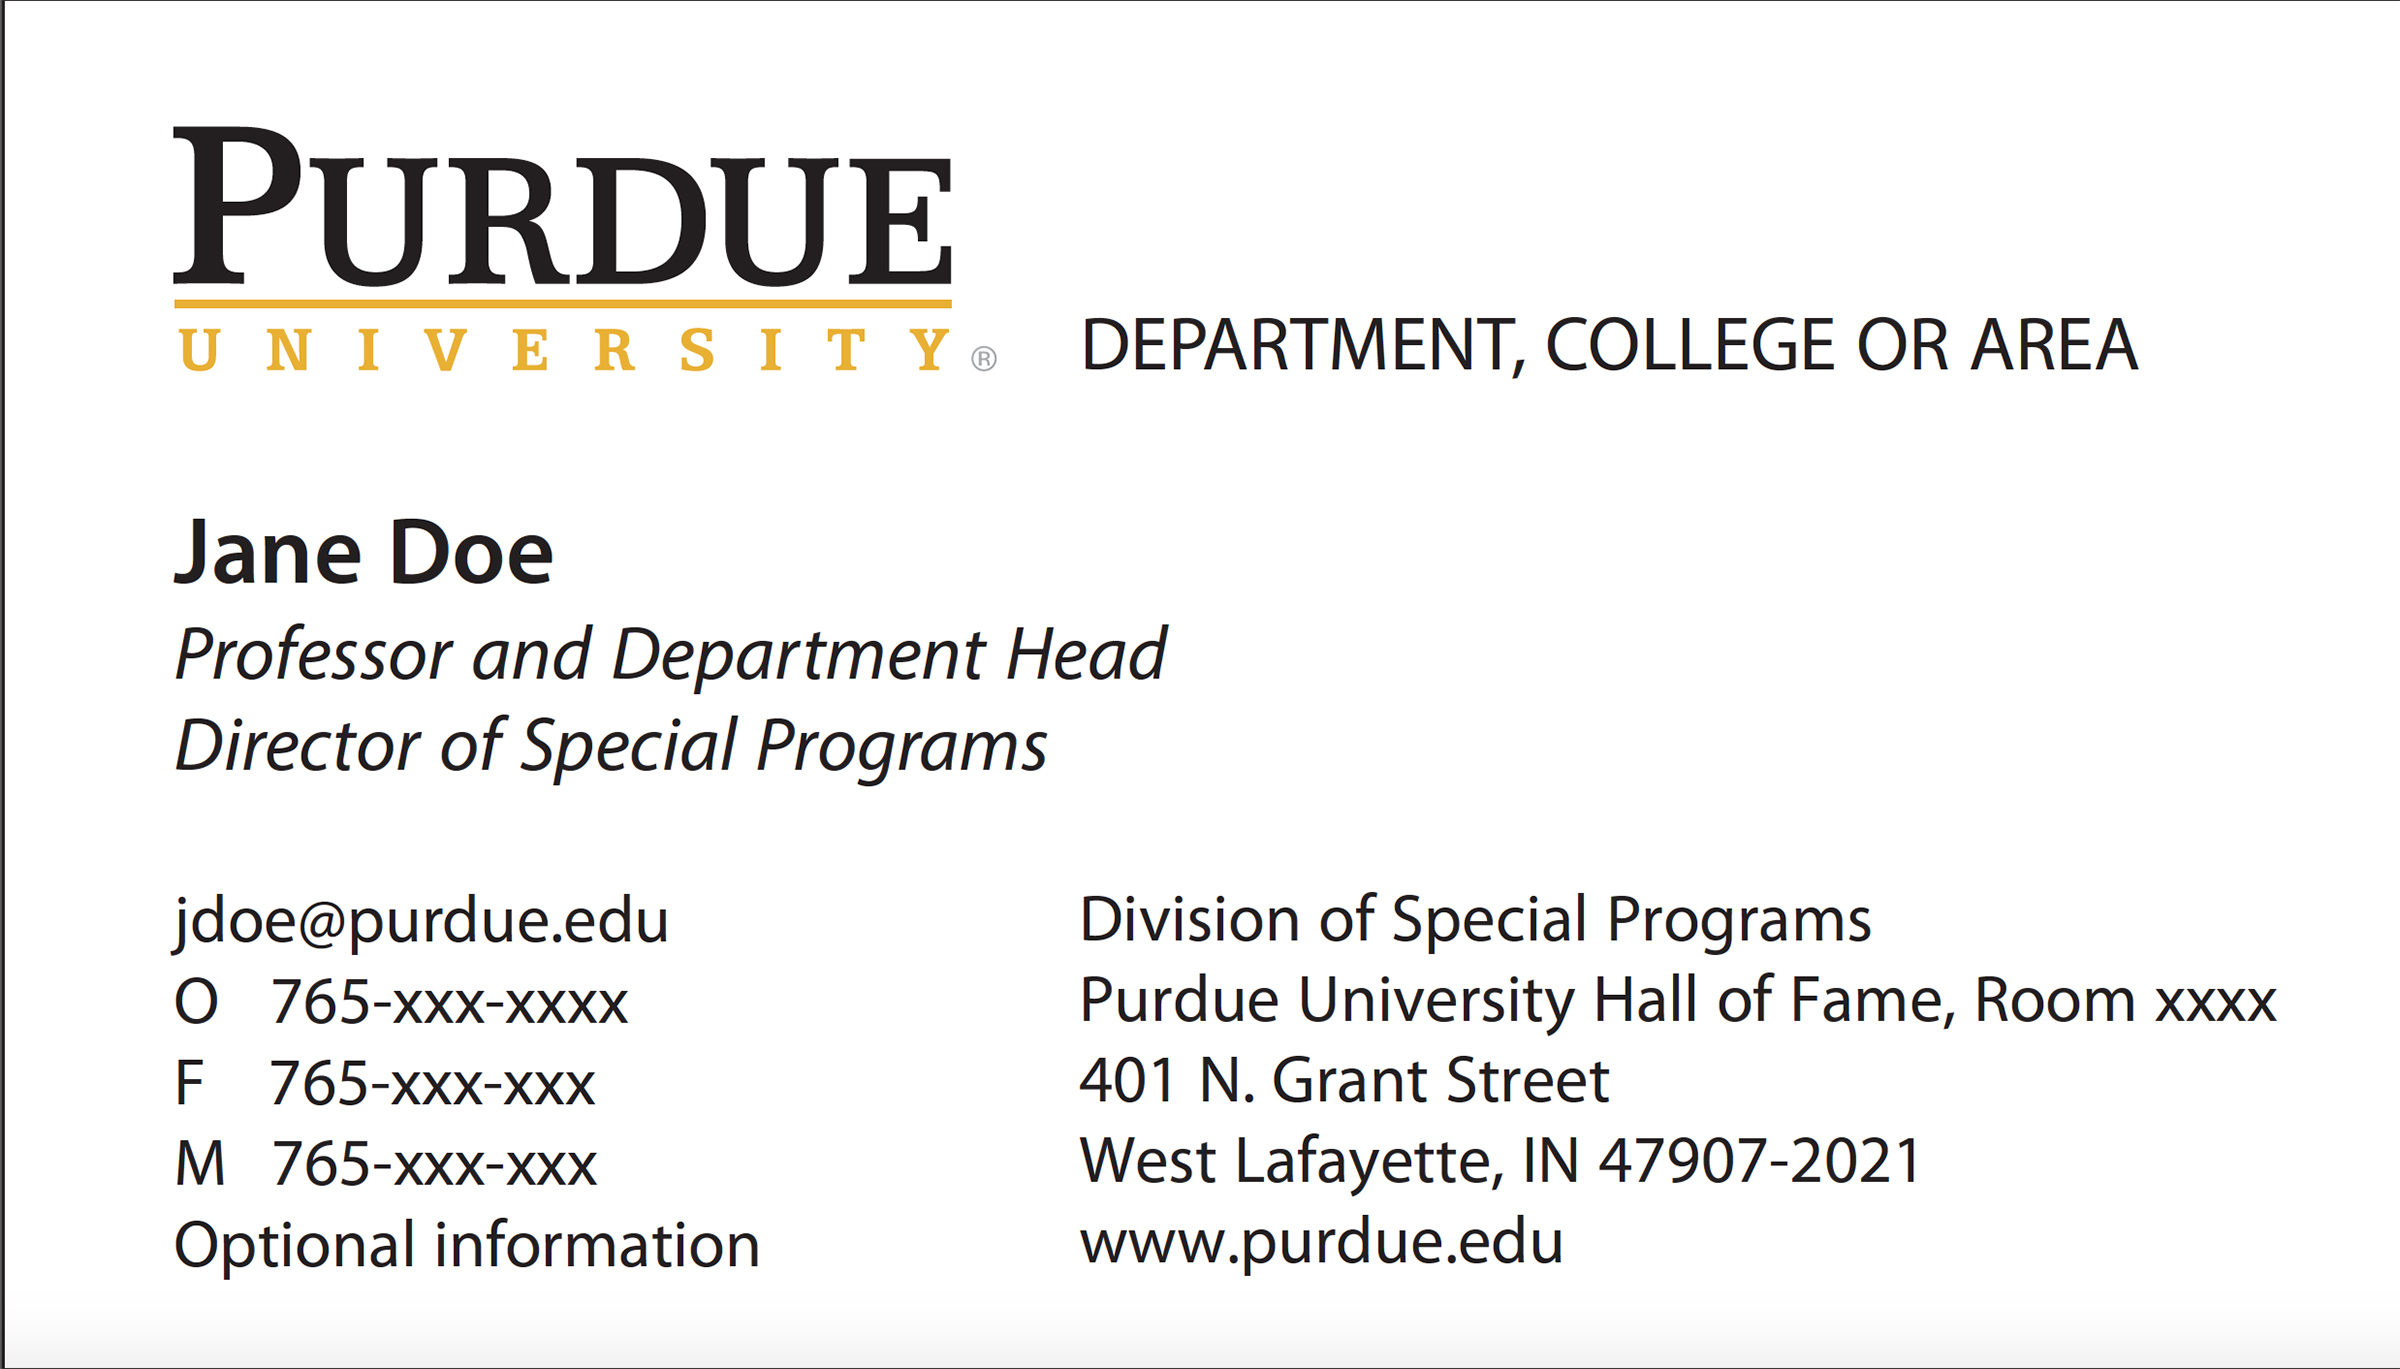 New Business Card Template Now Online - Purdue University News Intended For Student Business Card Template